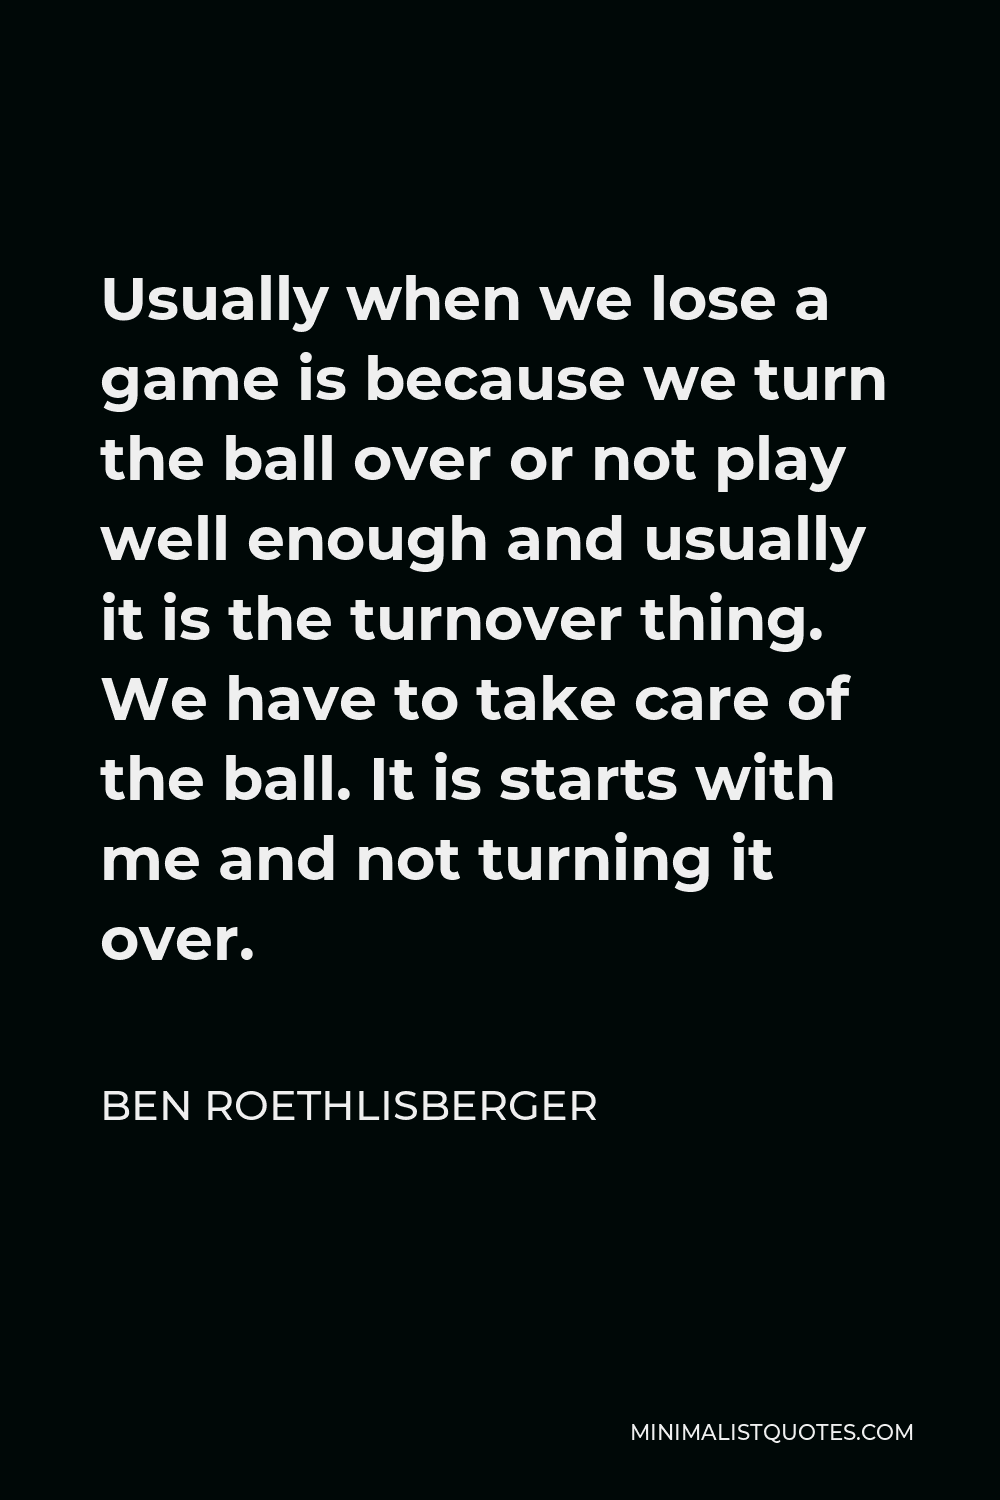 Ben Roethlisberger Quote - Usually when we lose a game is because we turn the ball over or not play well enough and usually it is the turnover thing. We have to take care of the ball. It is starts with me and not turning it over.